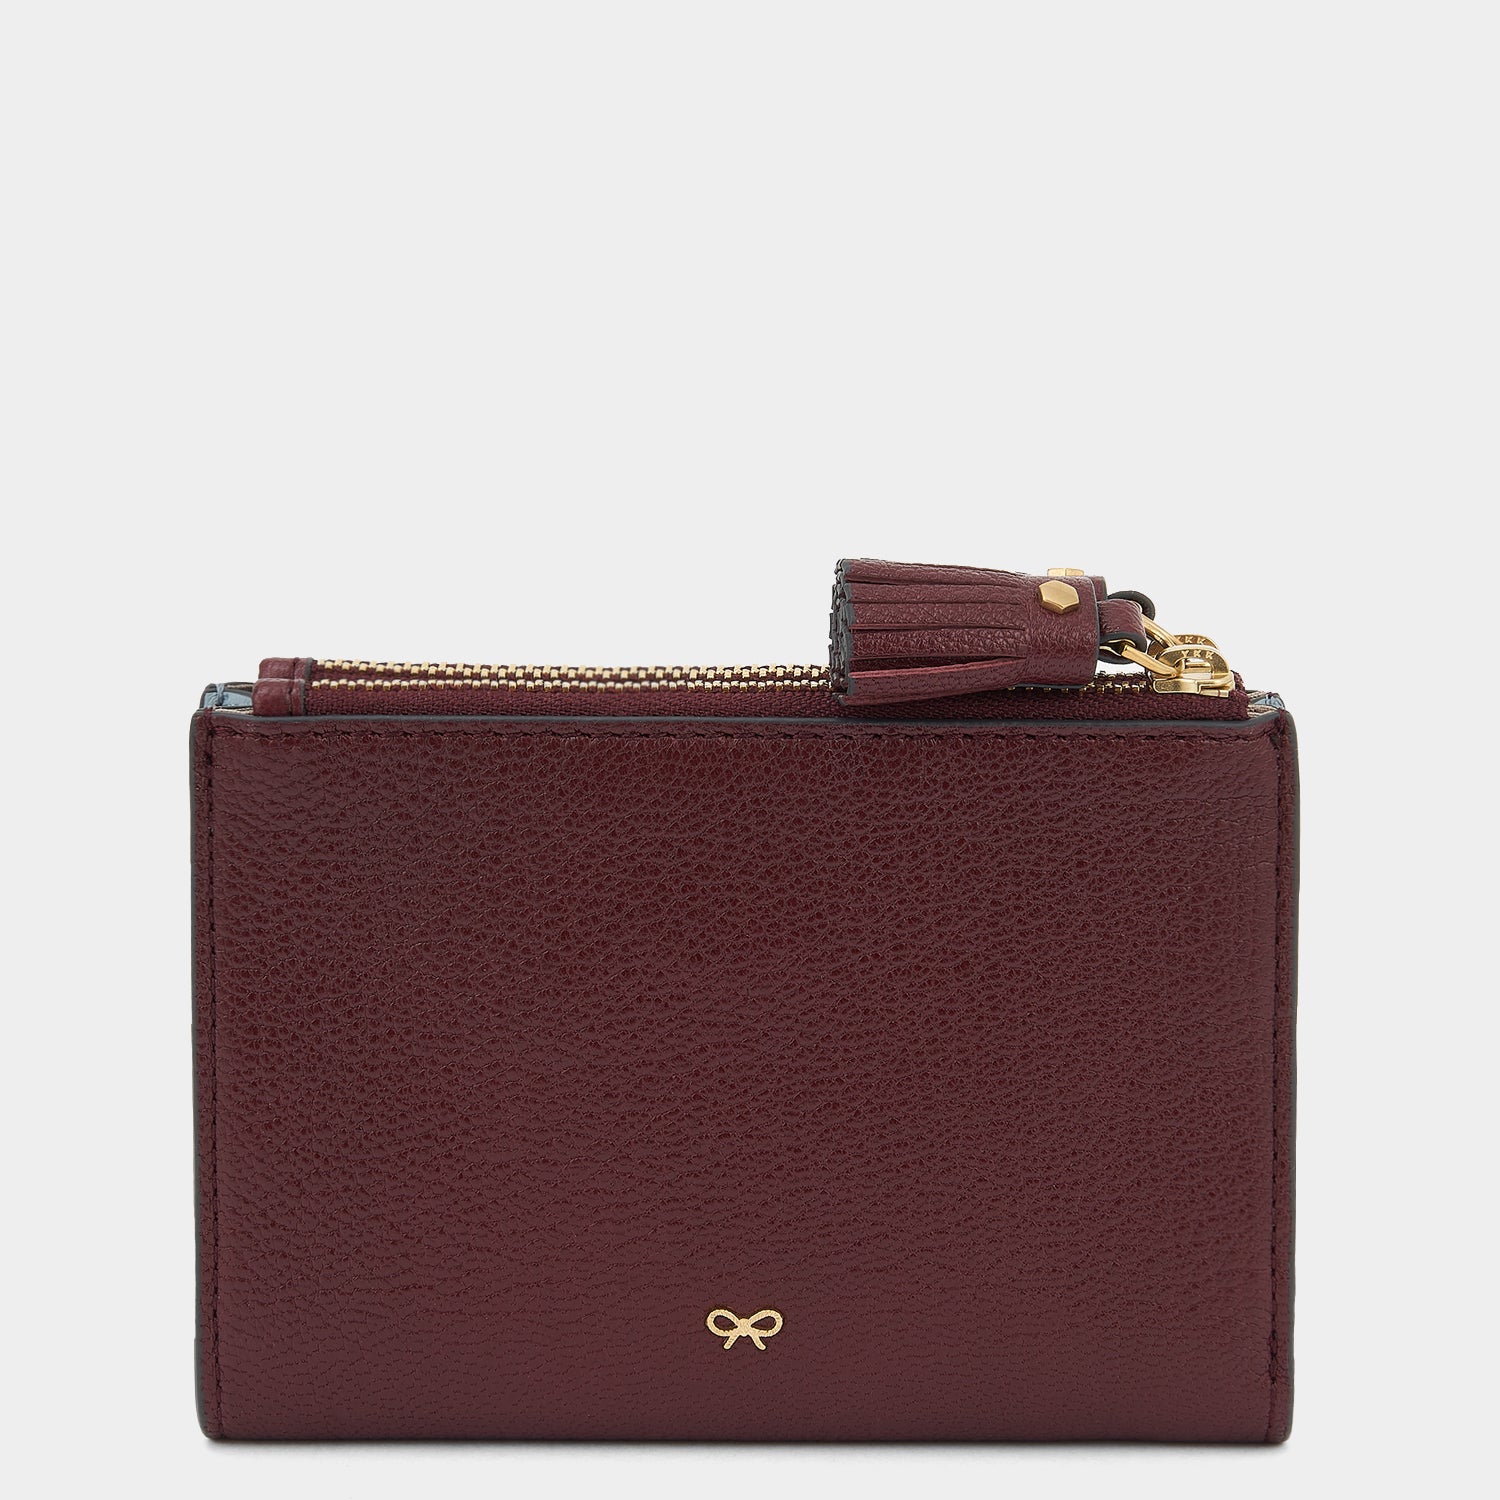 Home Office Pouch | Anya Hindmarch UK